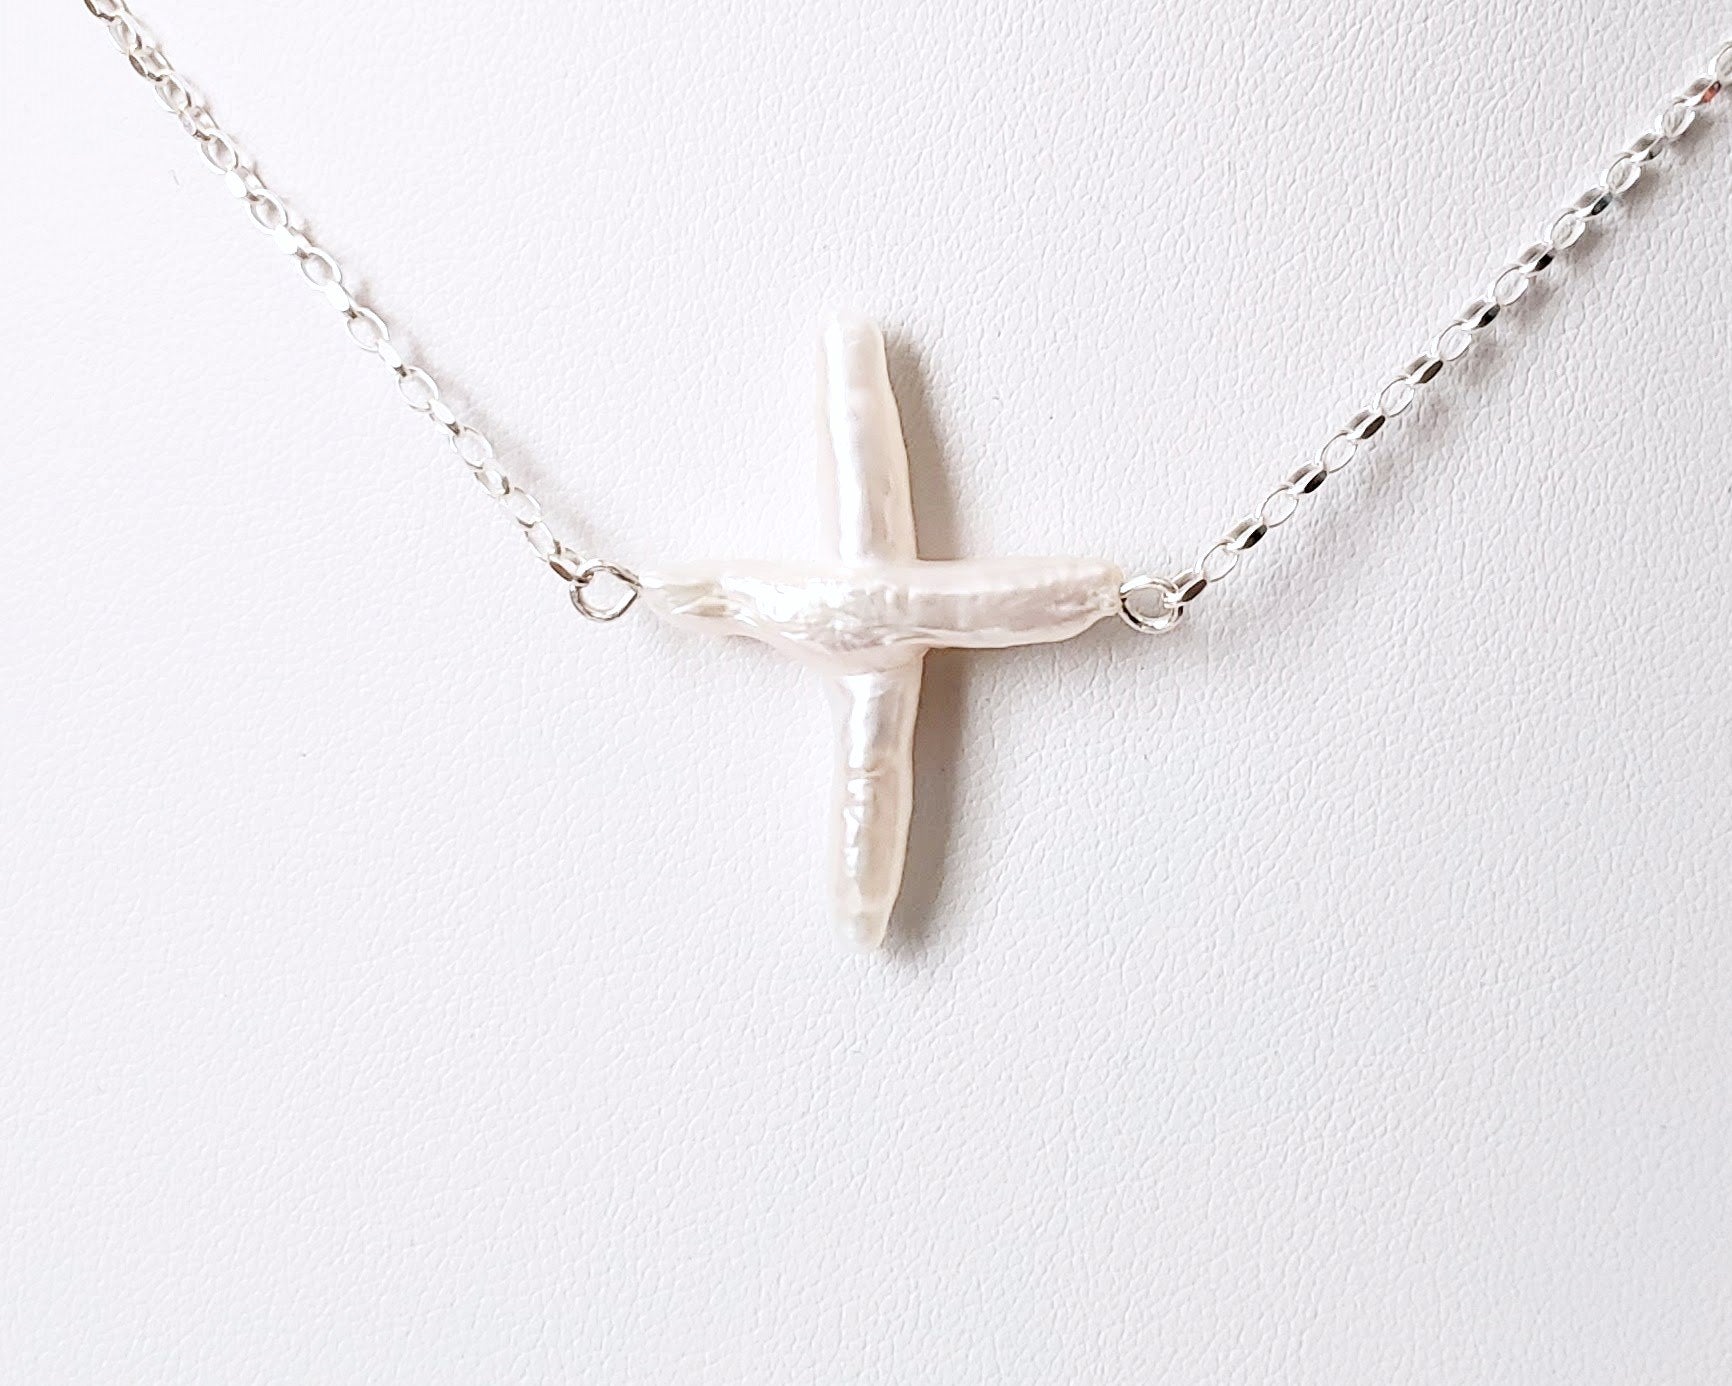 Floating Large Baroque Pearl Cross Necklace, White Baroque Freshwater Cultured Pearl Cross on Sterling Silver Chain. 